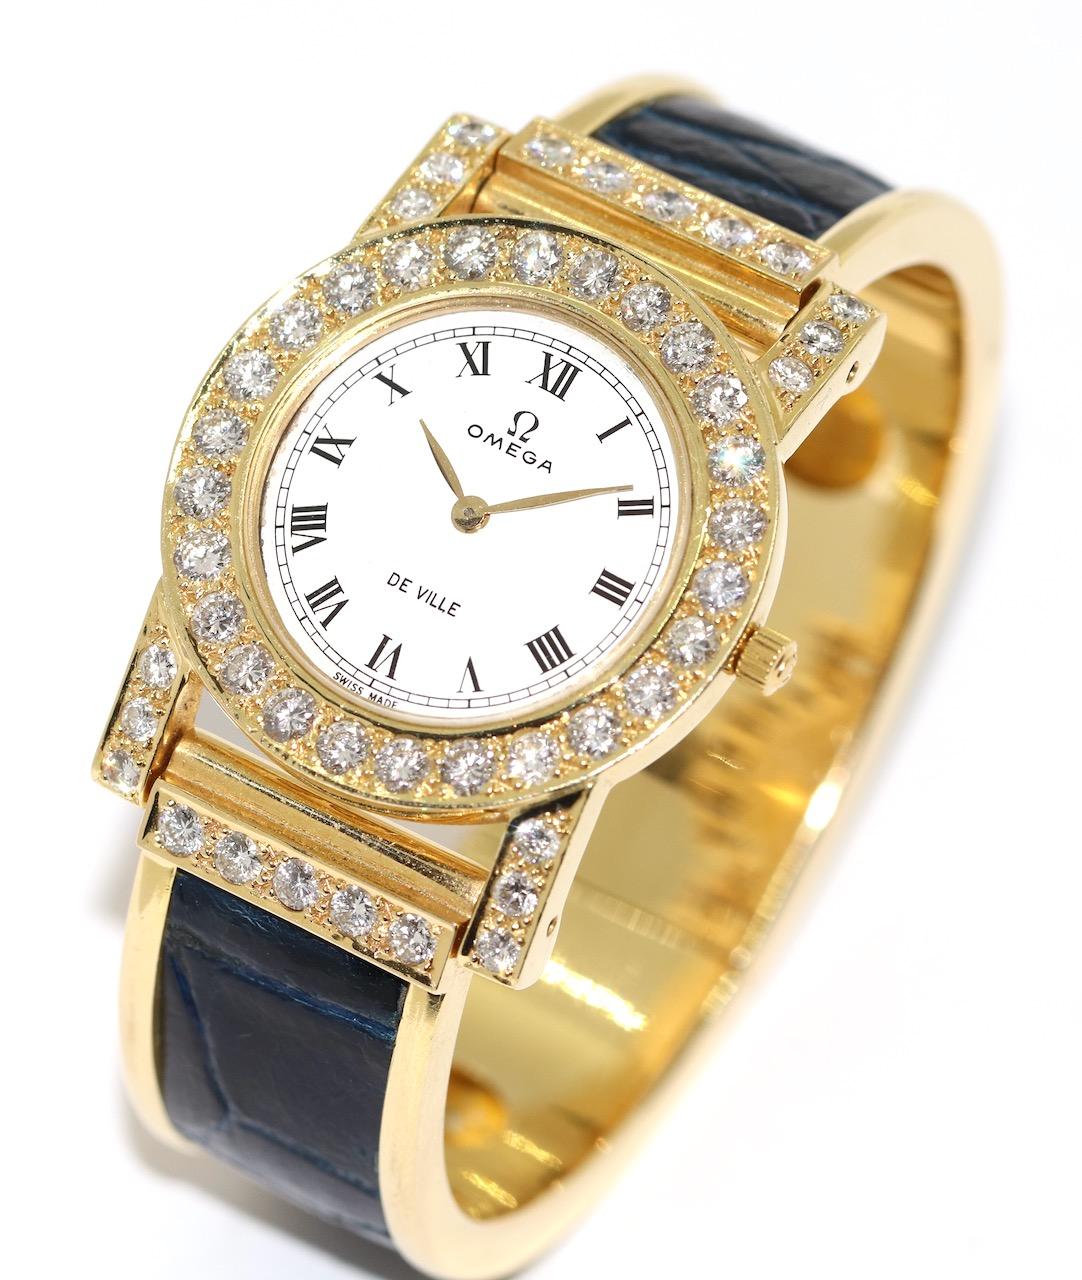 Exclusive women's watch by Omega. 18k yellow gold and diamonds.

Beautiful Omega De Ville ladies' watch, 18k yellow gold case and strap. Bracelet additionally set with high-quality leather.

The watch is set with a total of 48 diamonds in a very